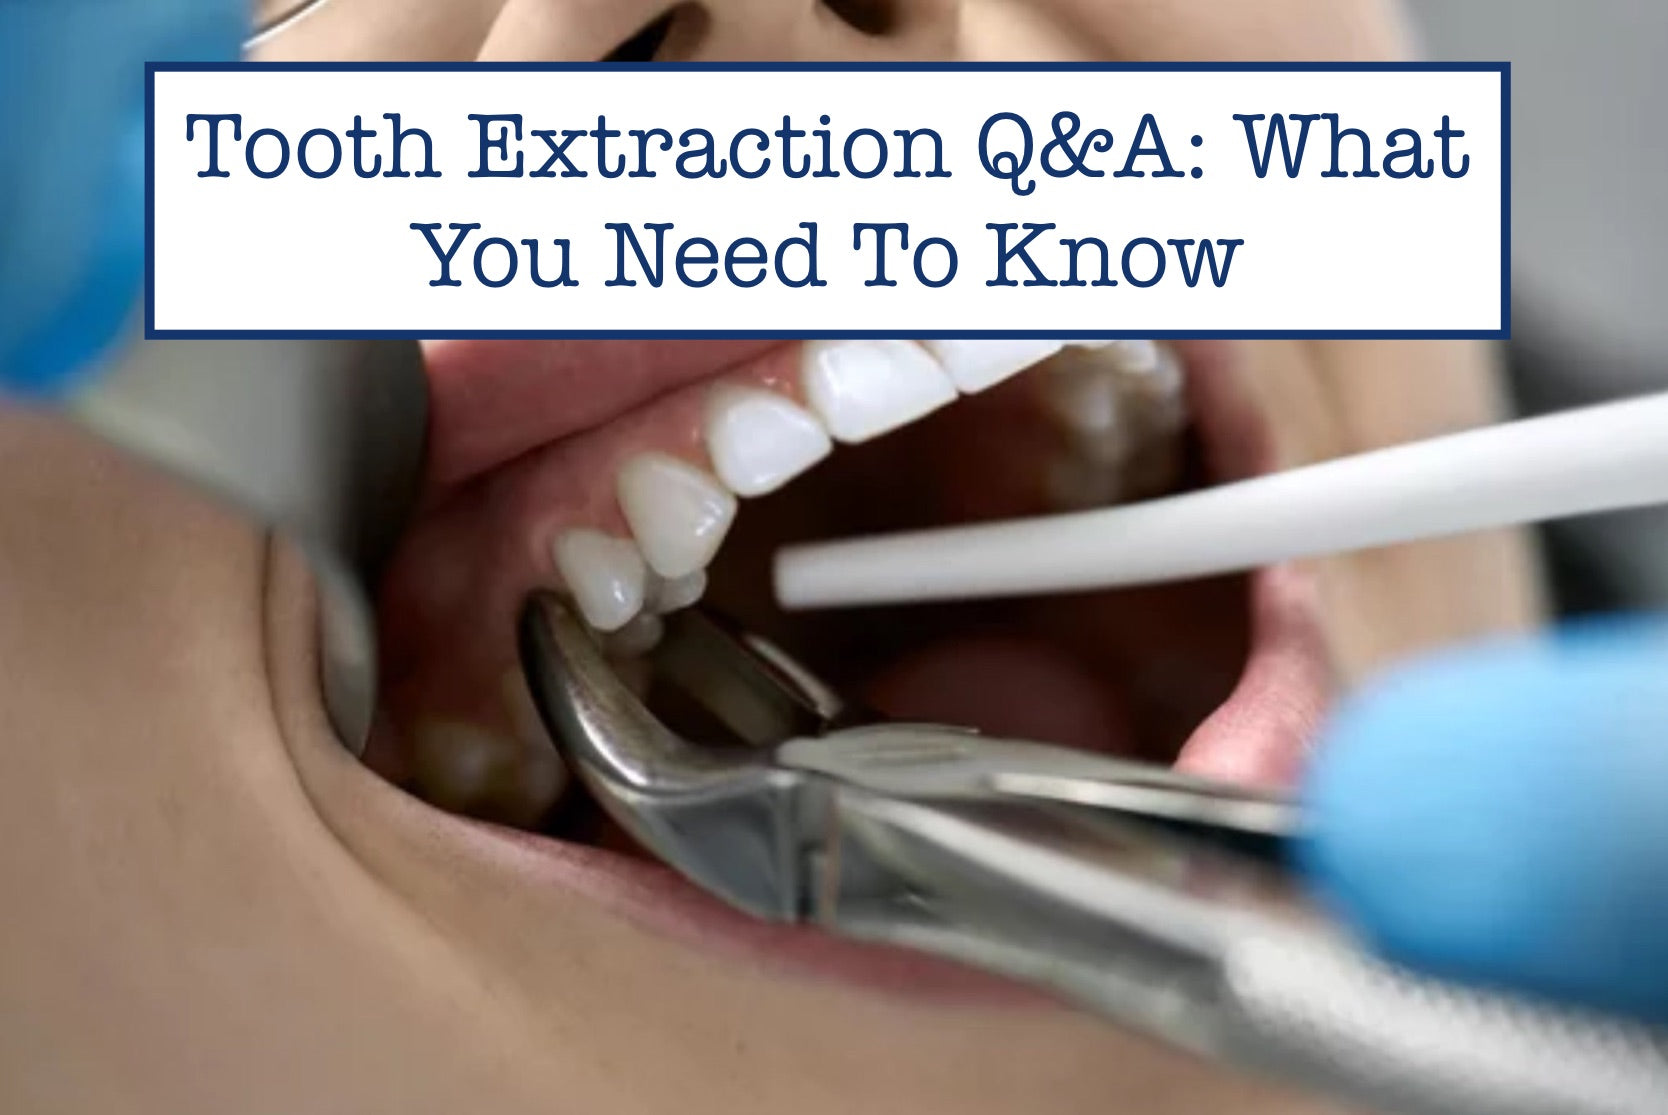 Tooth Extraction Q&A: What You Need To Know